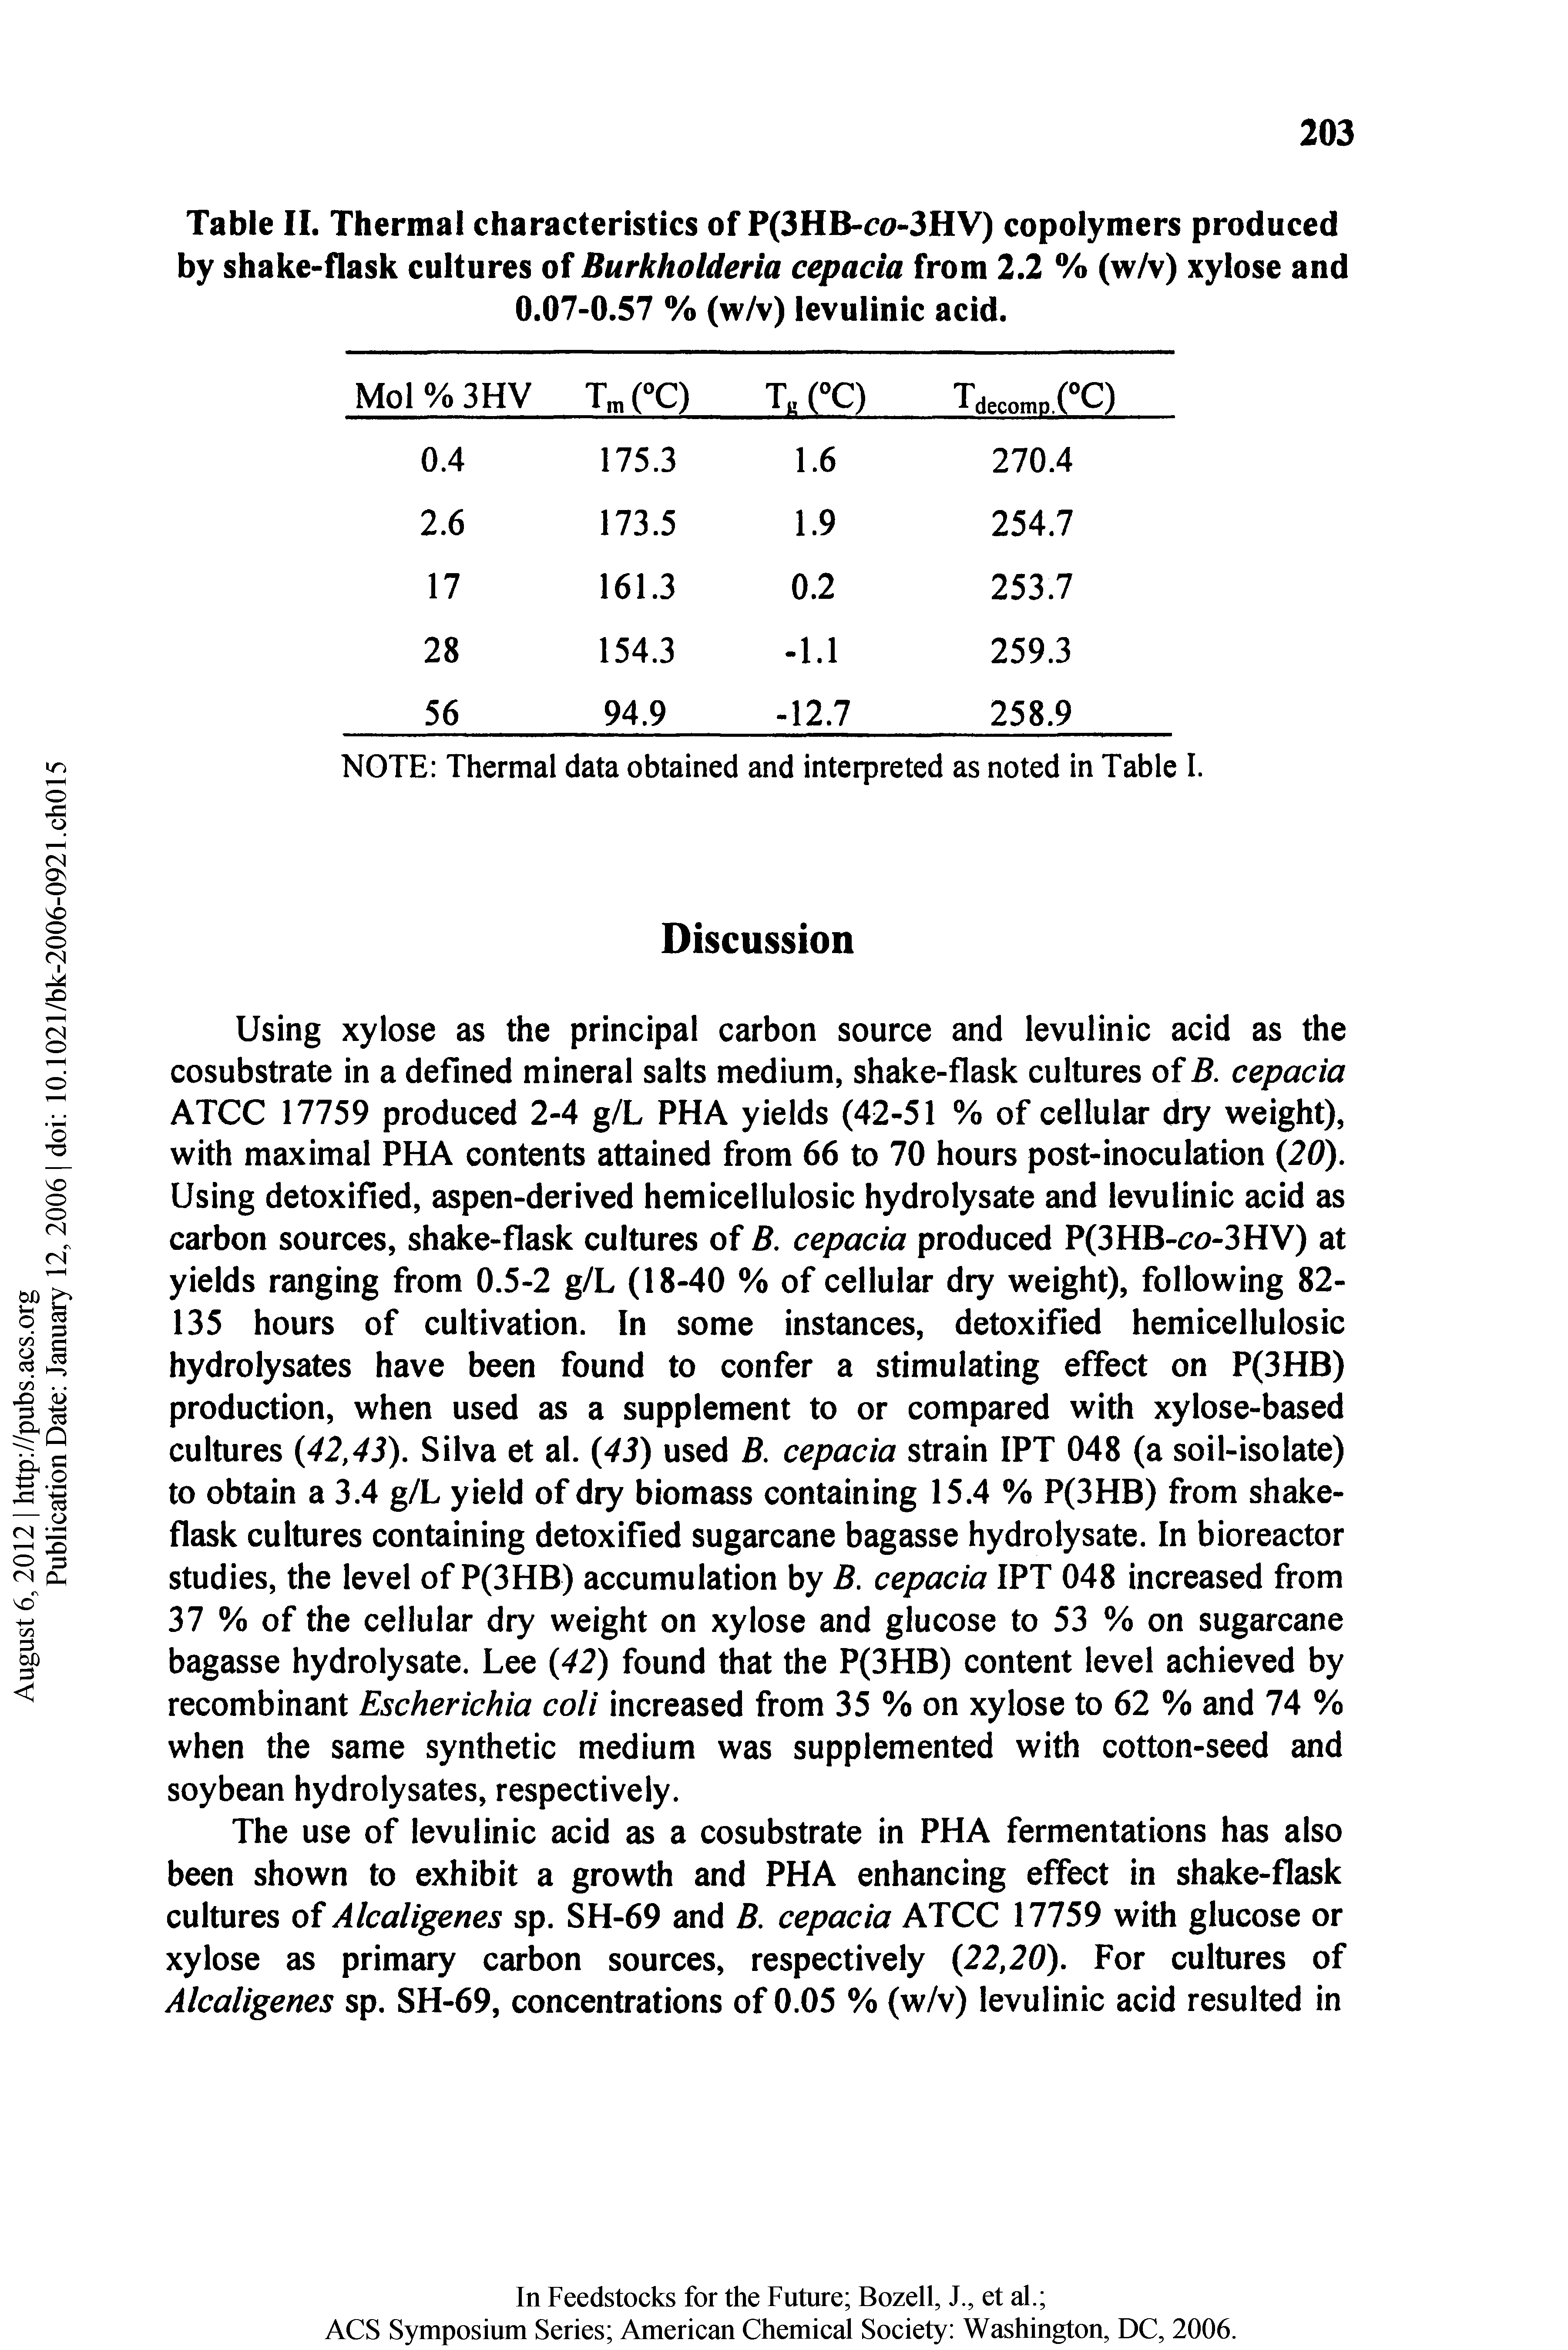 Table II. Thermal characteristics of P(3HB-C0-3HV) copolymers produced by shake-flask cultures of Burkholderia cepacia from 2.2 % (w/v) xylose and 0.07-0.57 % (w/v) levulinic acid.